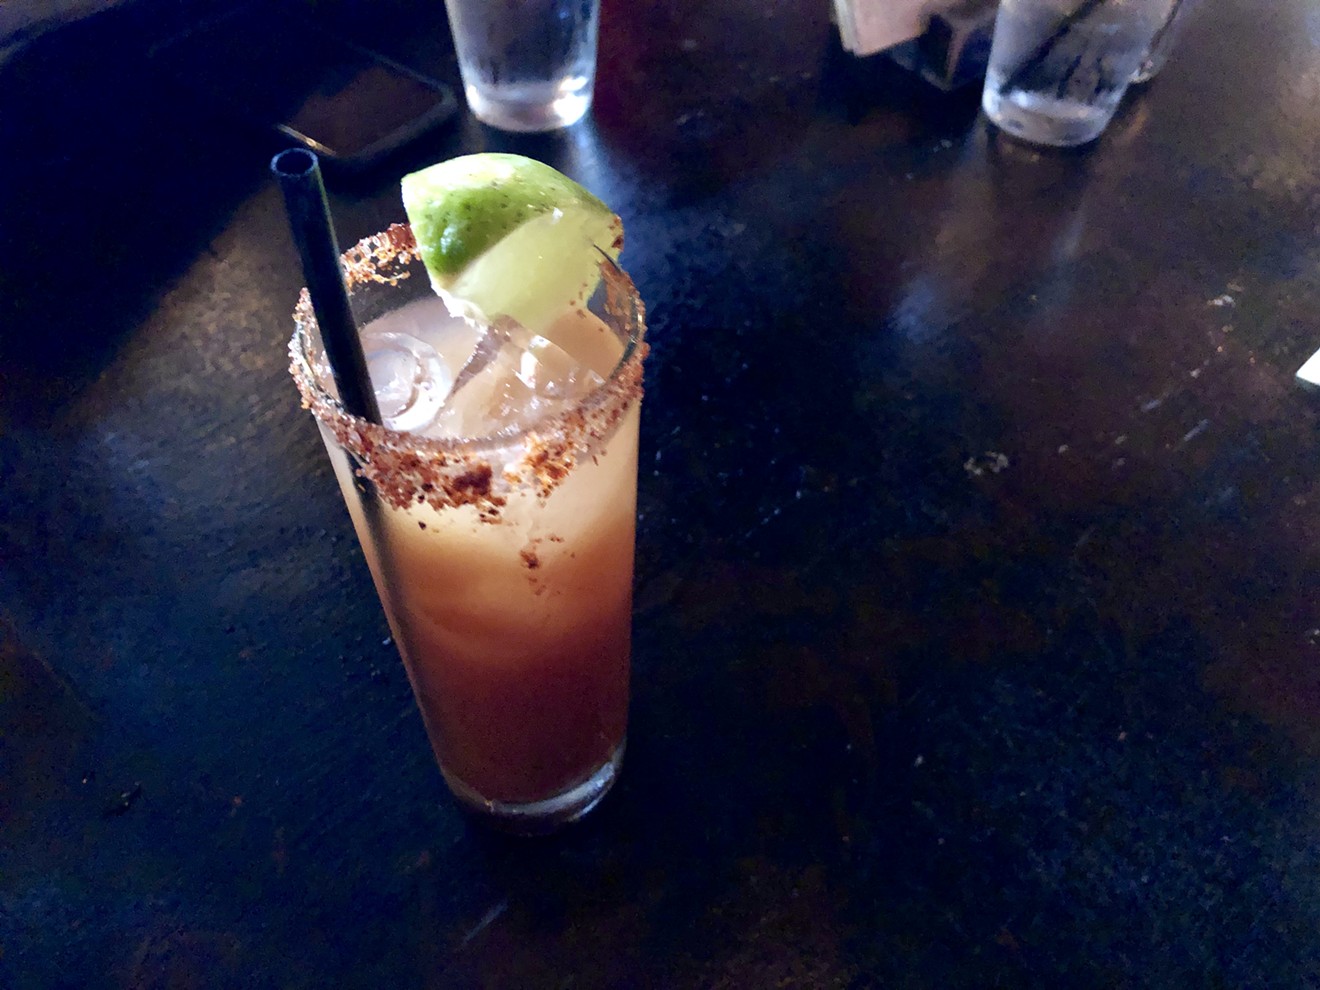 Ruins' bloody mary is a solid way to start brunch.